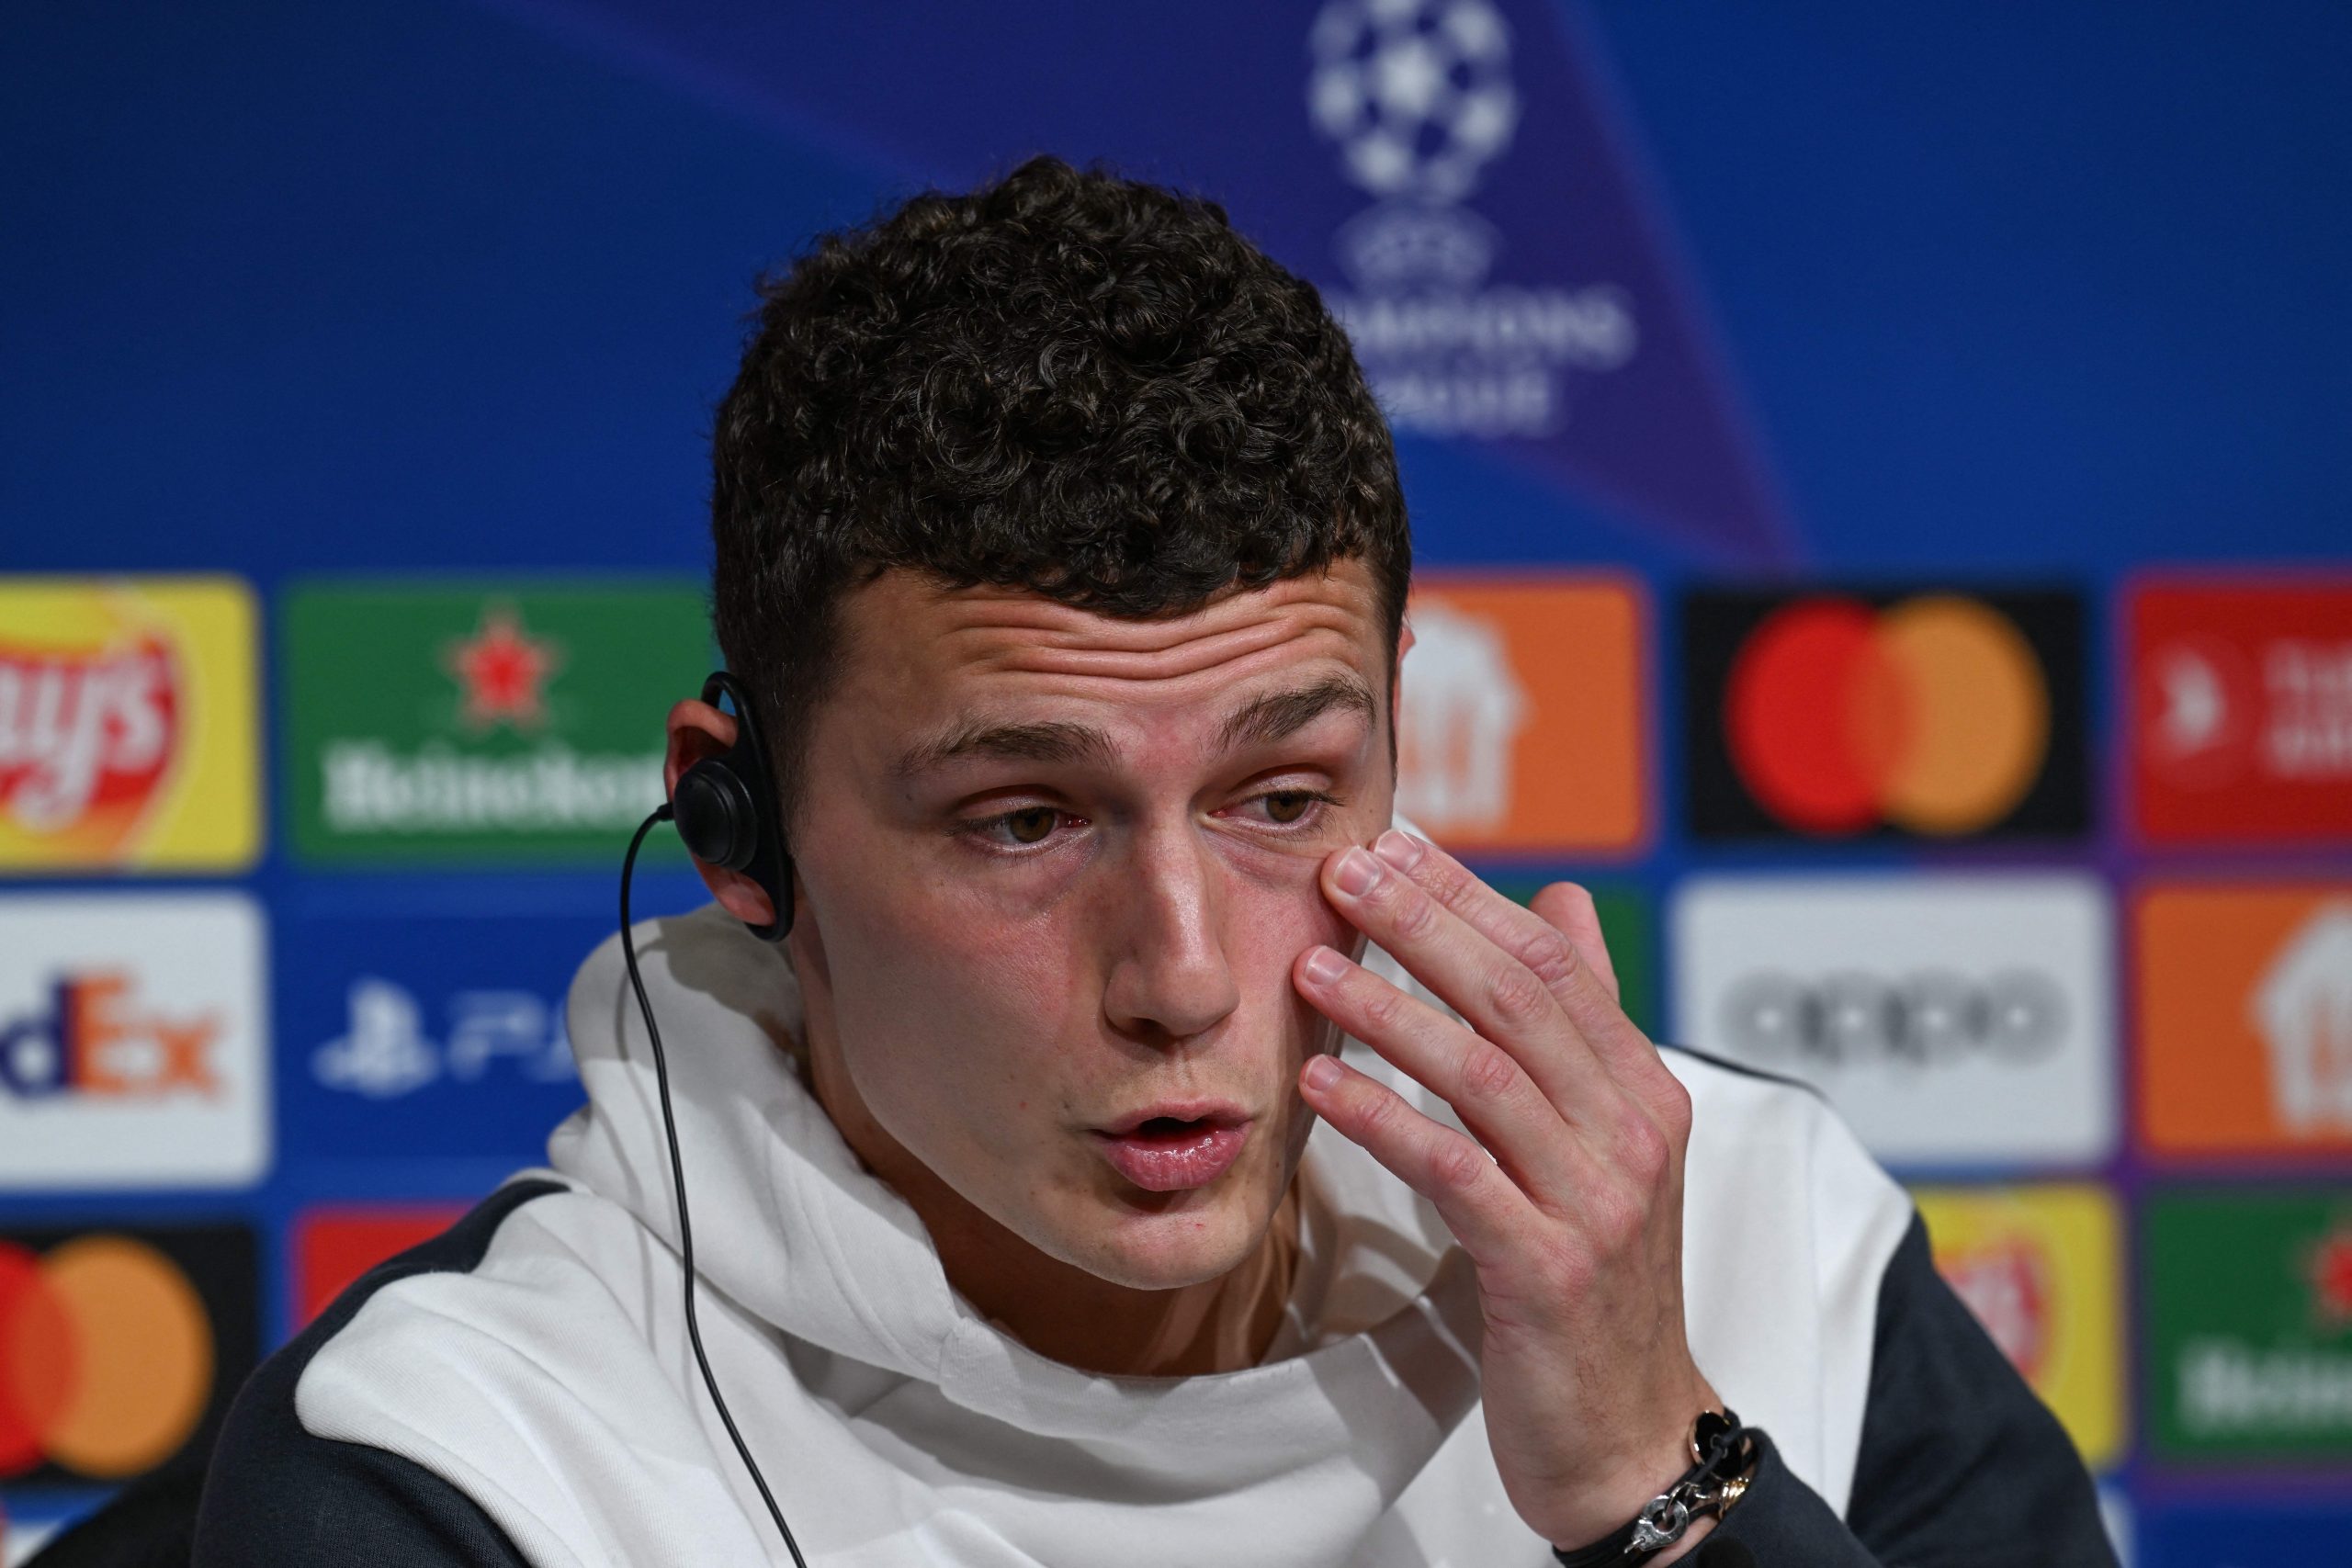 Bayern Munich's French defender Benjamin Pavard addresses a press conference on the eve of the UEFA Champions League quarter-final, second leg football match between Bayern Munich and Manchester City in Munich, southern Germany on April 18, 2023. (Photo by CHRISTOF STACHE / AFP) (Photo by CHRISTOF STACHE/AFP via Getty Images)